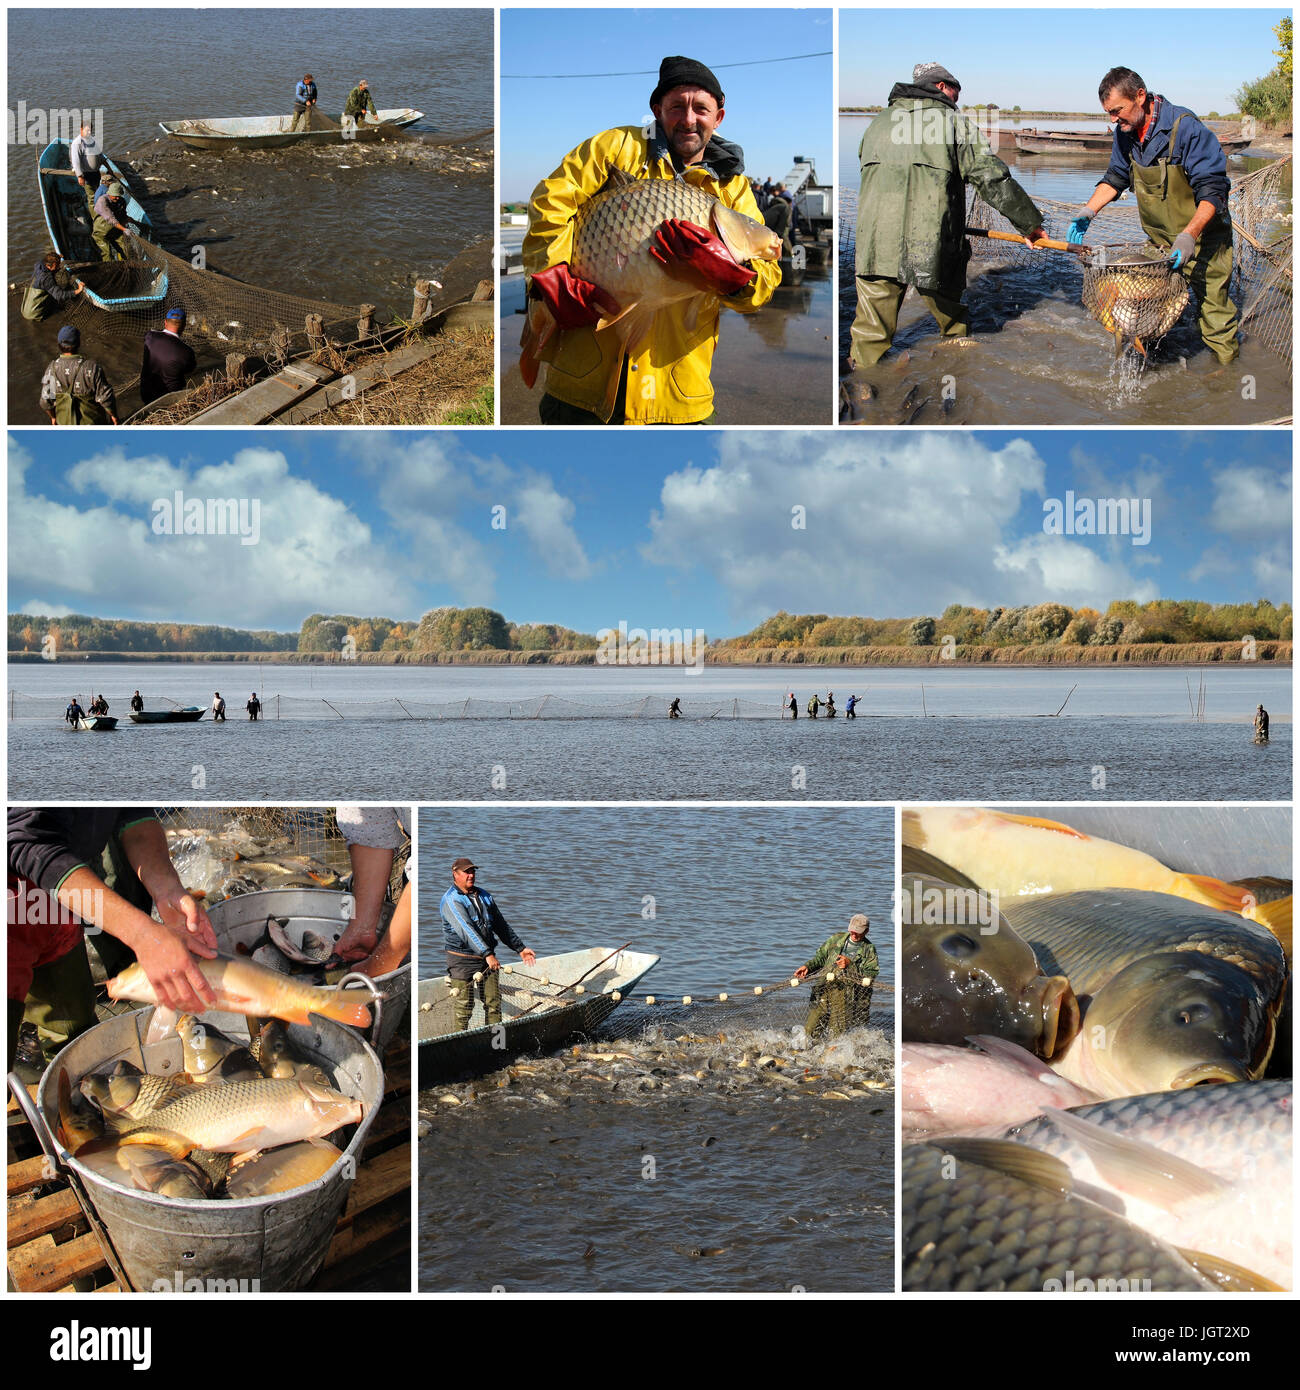 Collage of photographs showing workers harvesting carp fish from a fish farm. Stock Photo